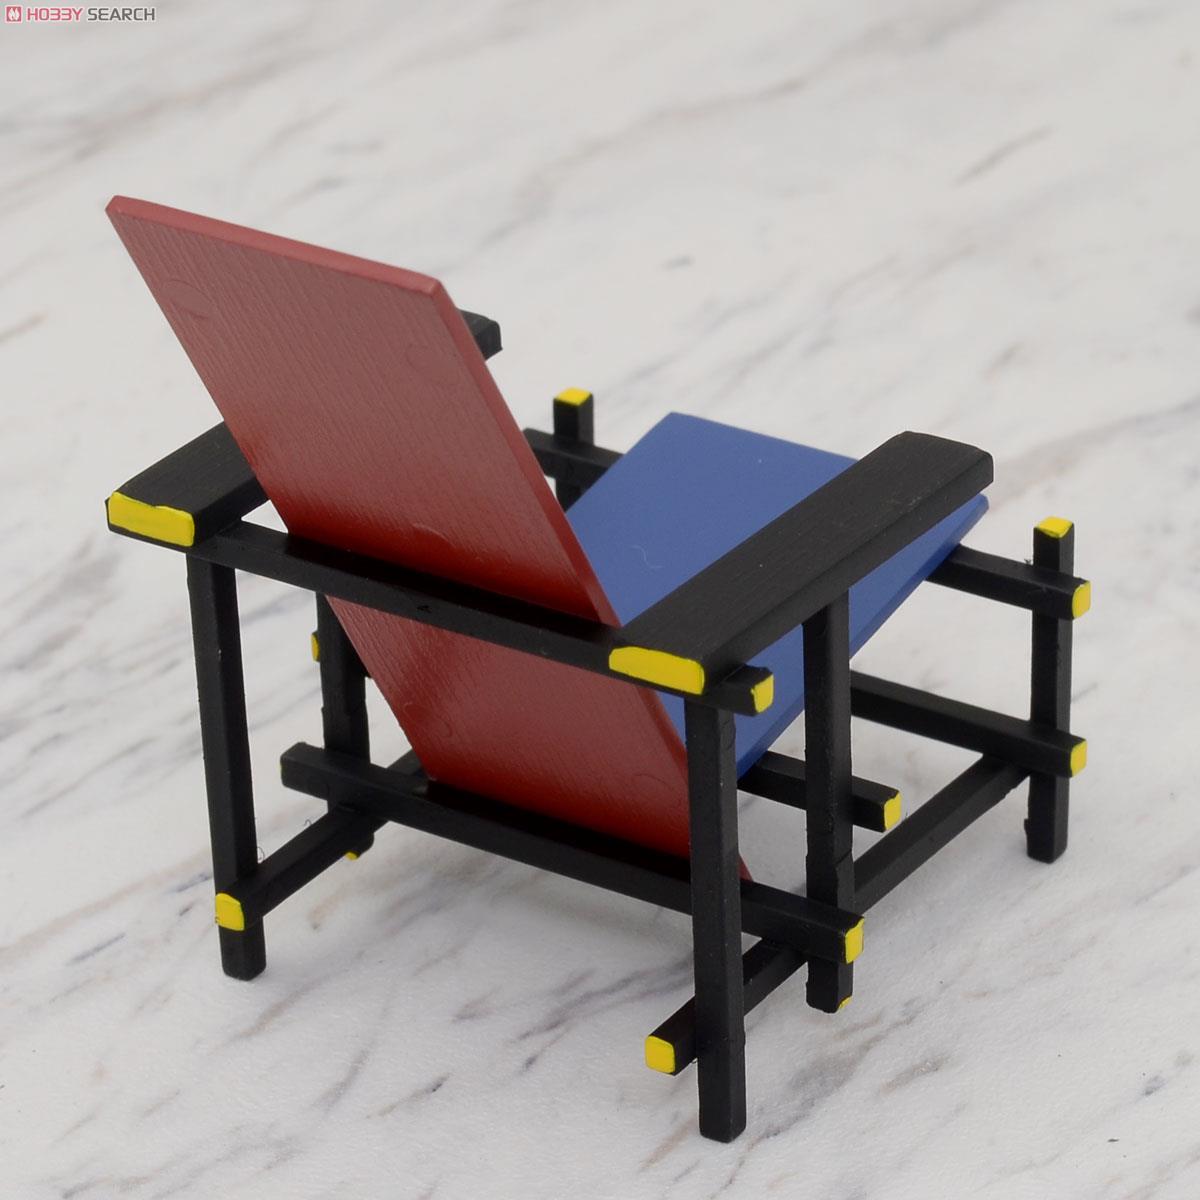 1/12 size Designers Chair - CP-01 No.1 (ドール) 商品画像4